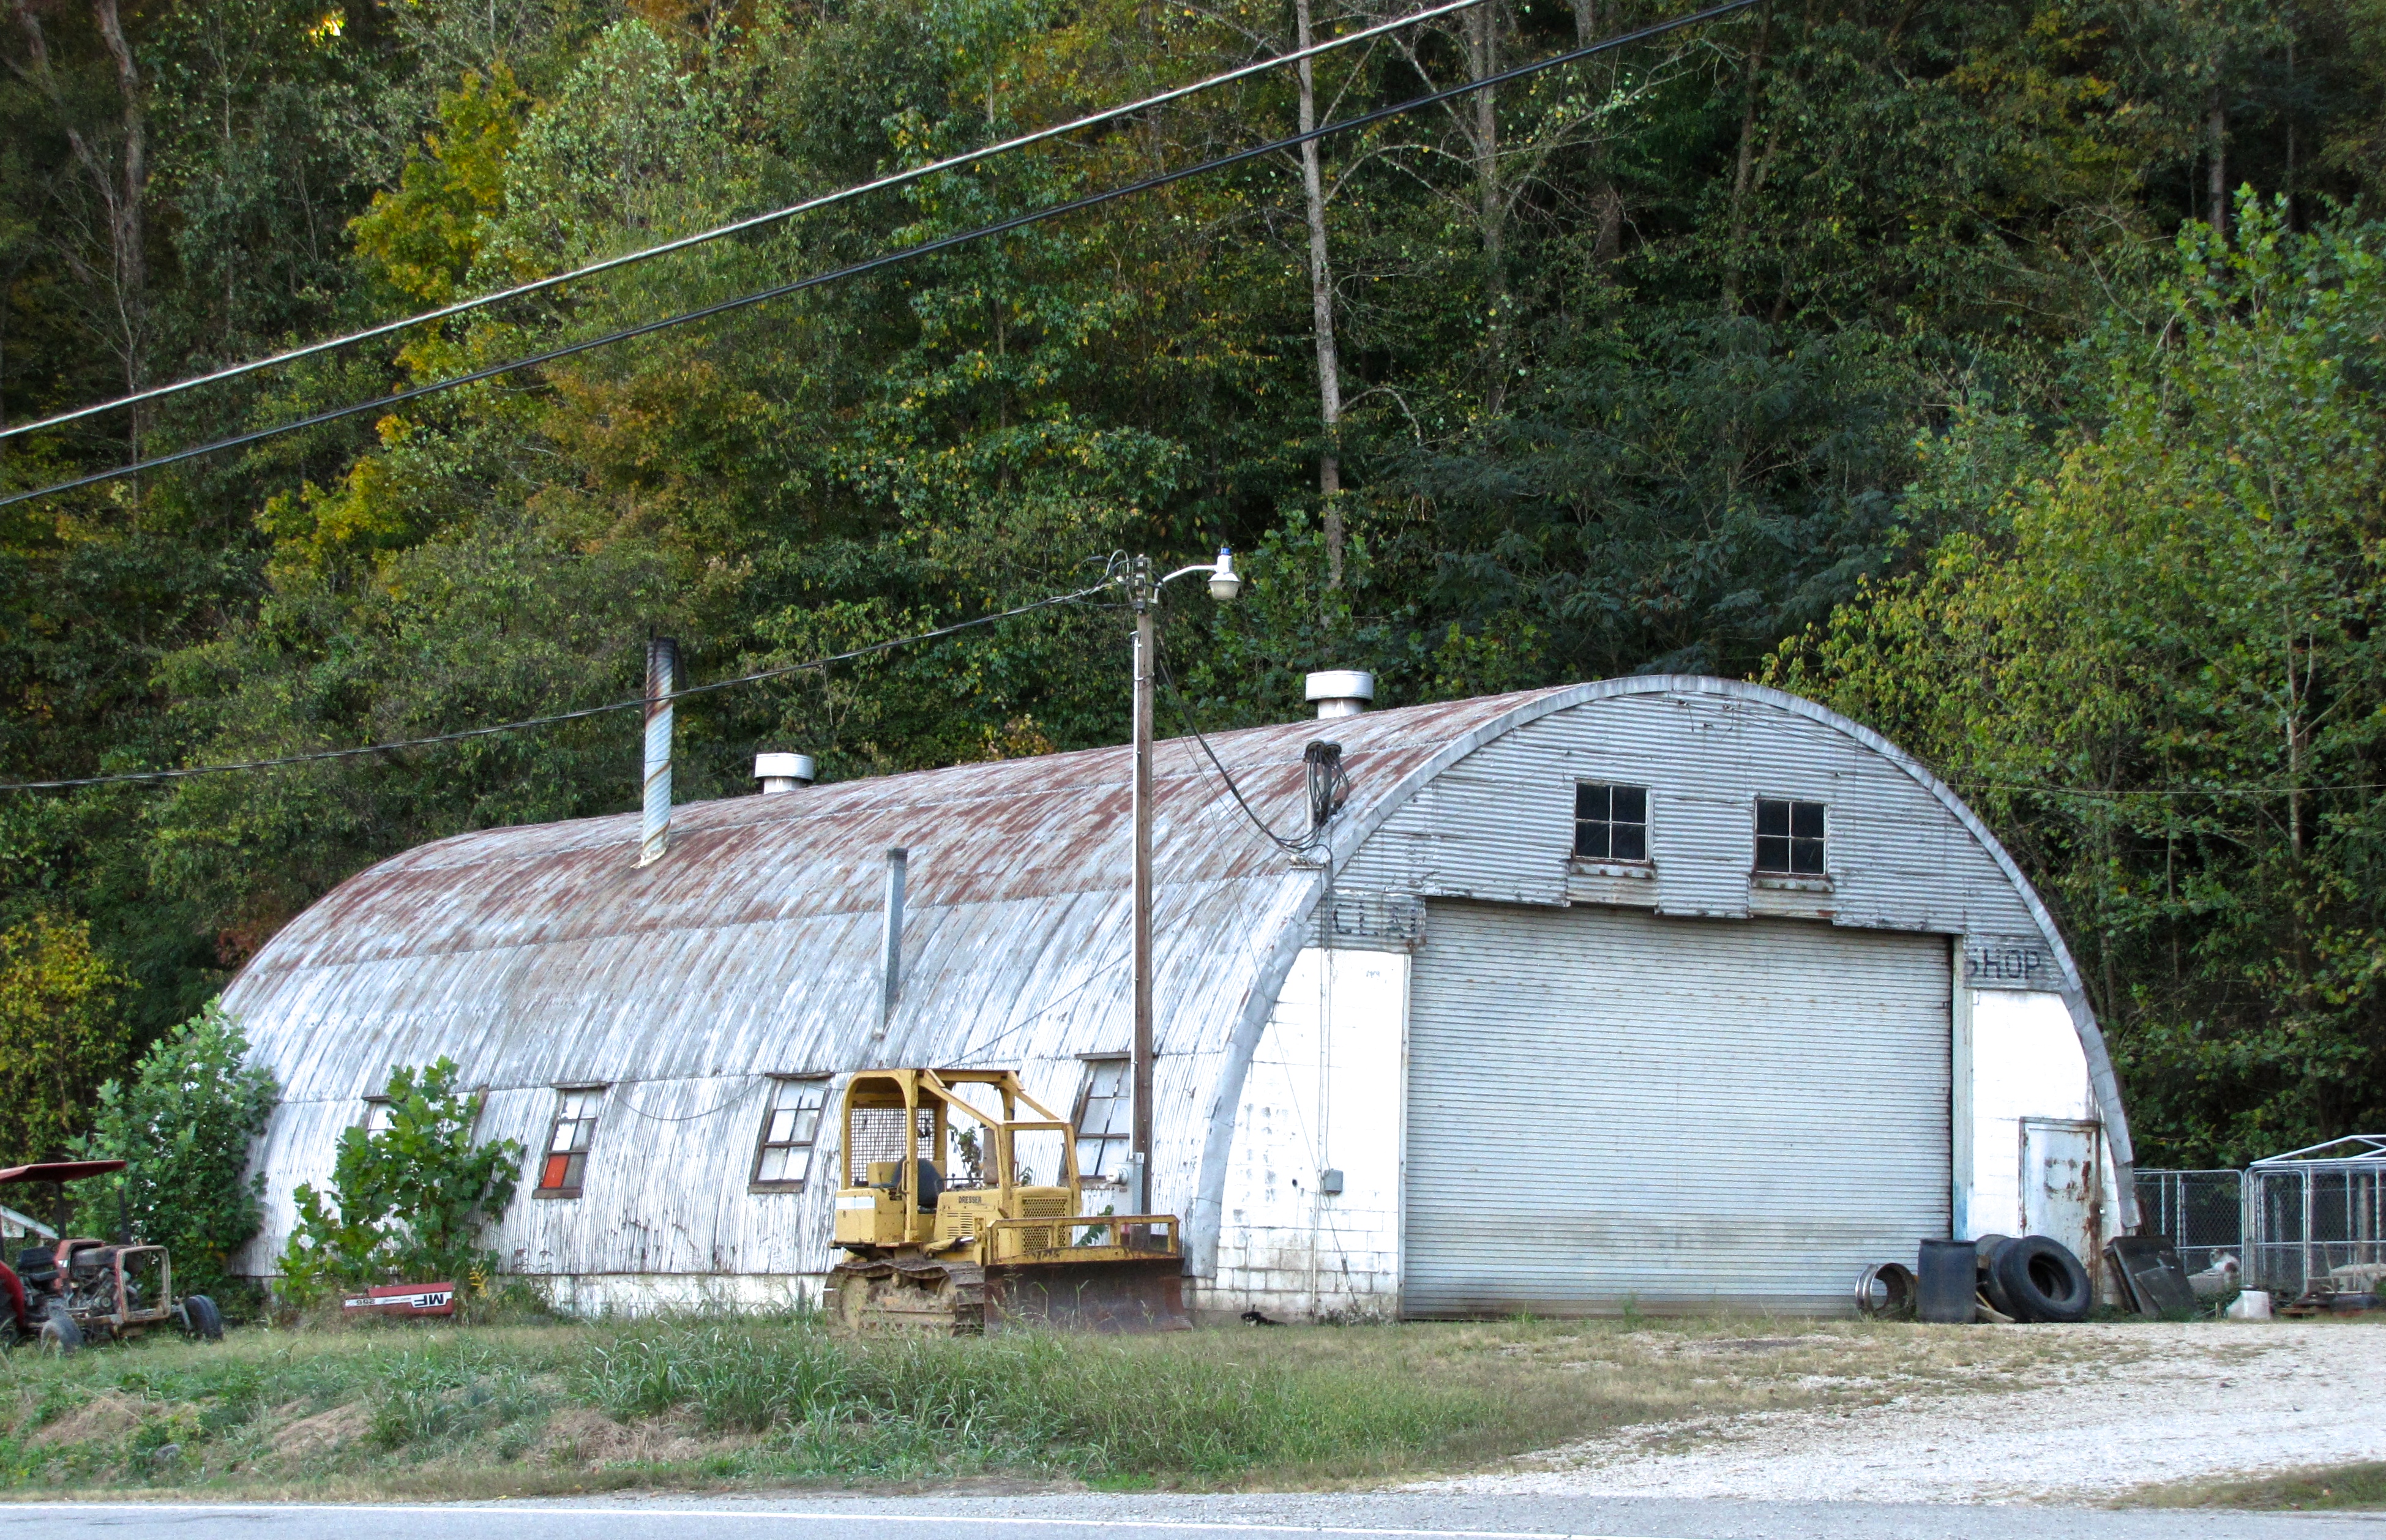 quonset hut in About Us, AL